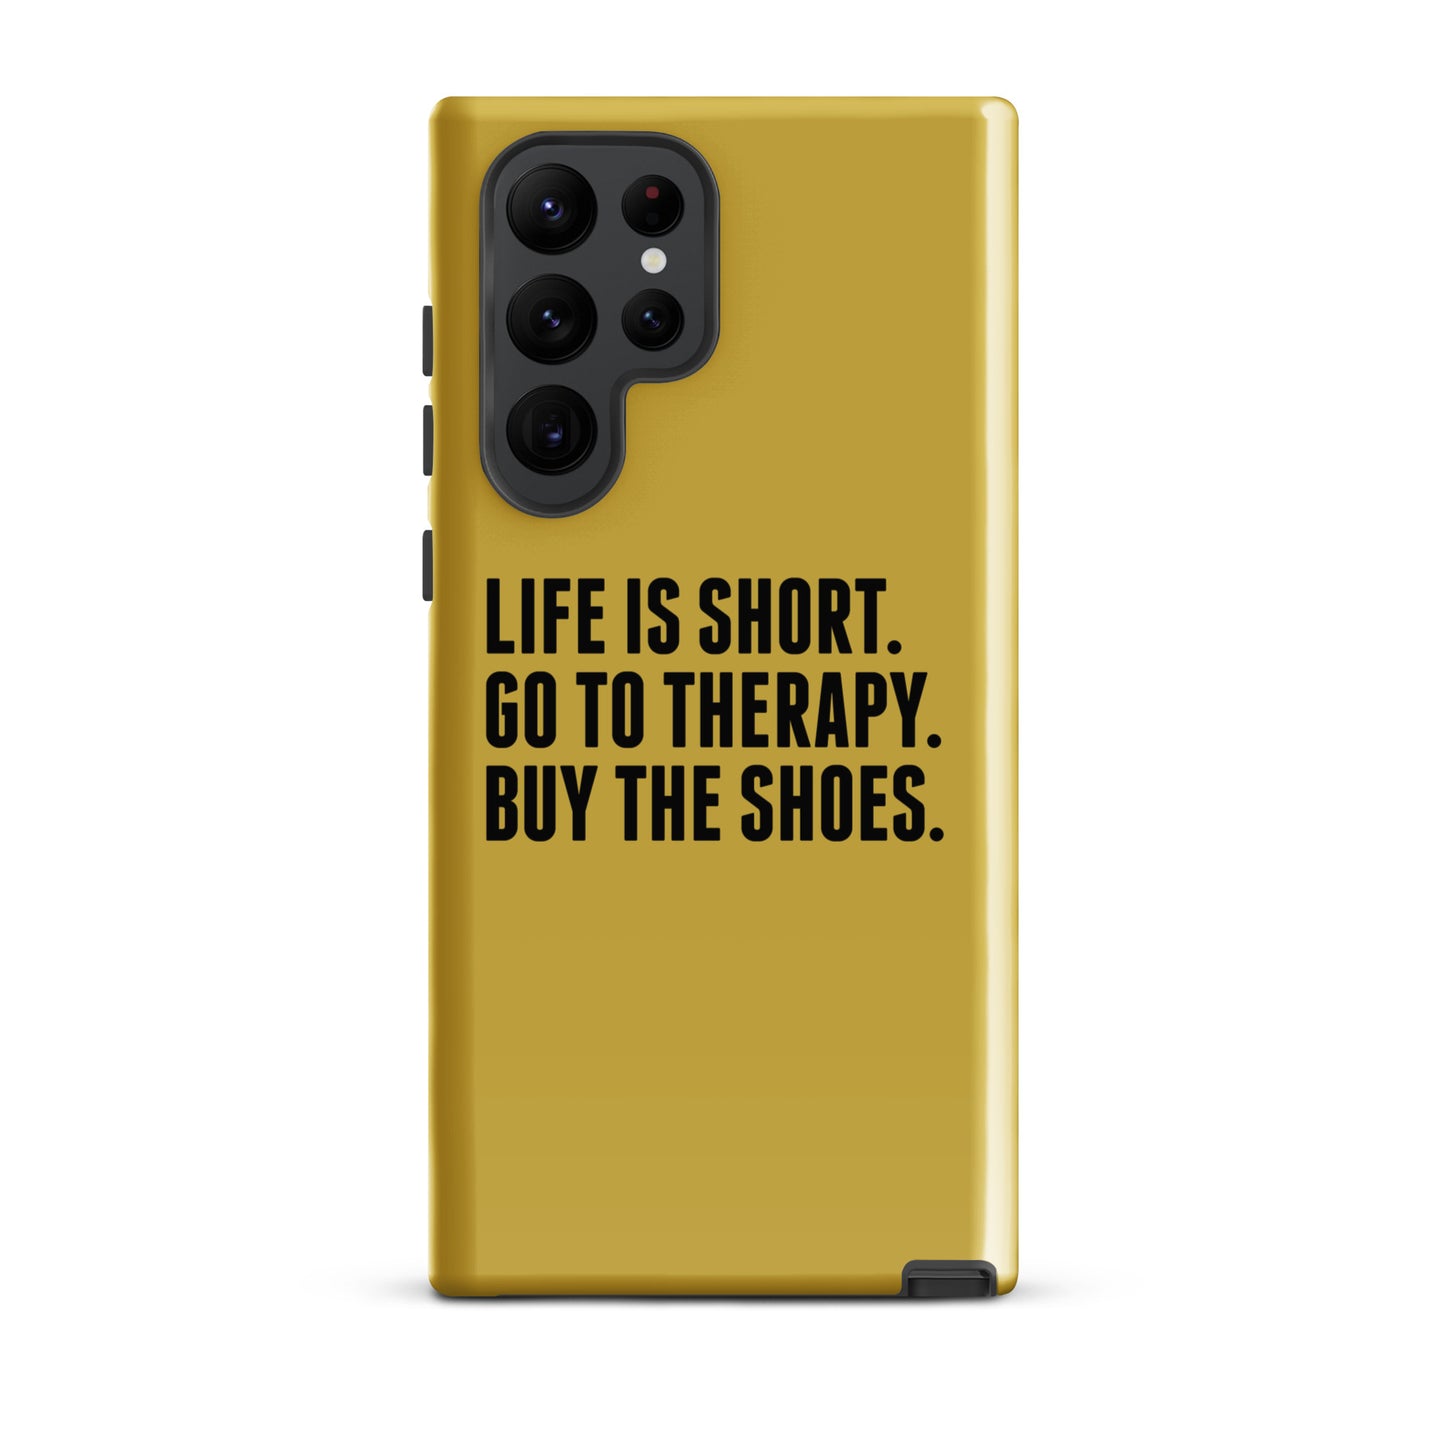 Life is Short Tough case for Samsung® (Gold)